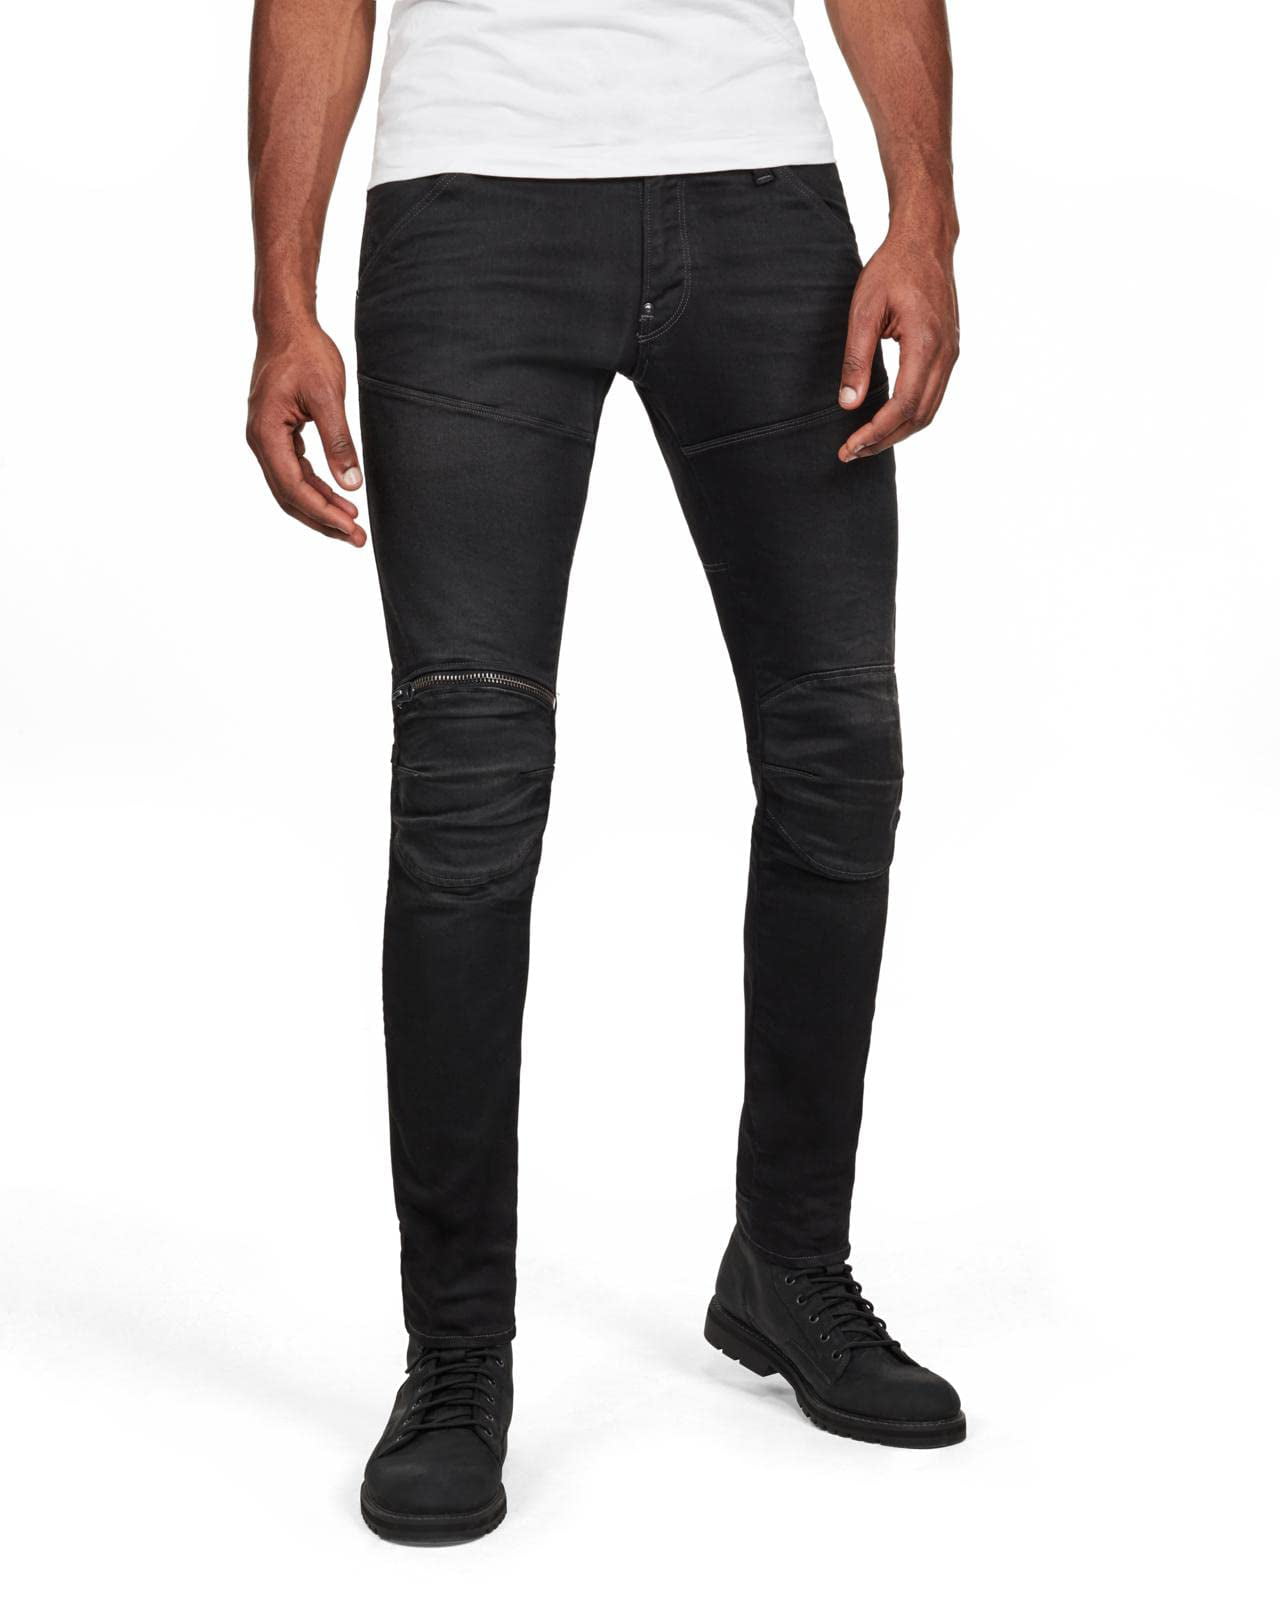 ASOS DESIGN Skinny Jeans With Coated Denim In Black With, 59% OFF